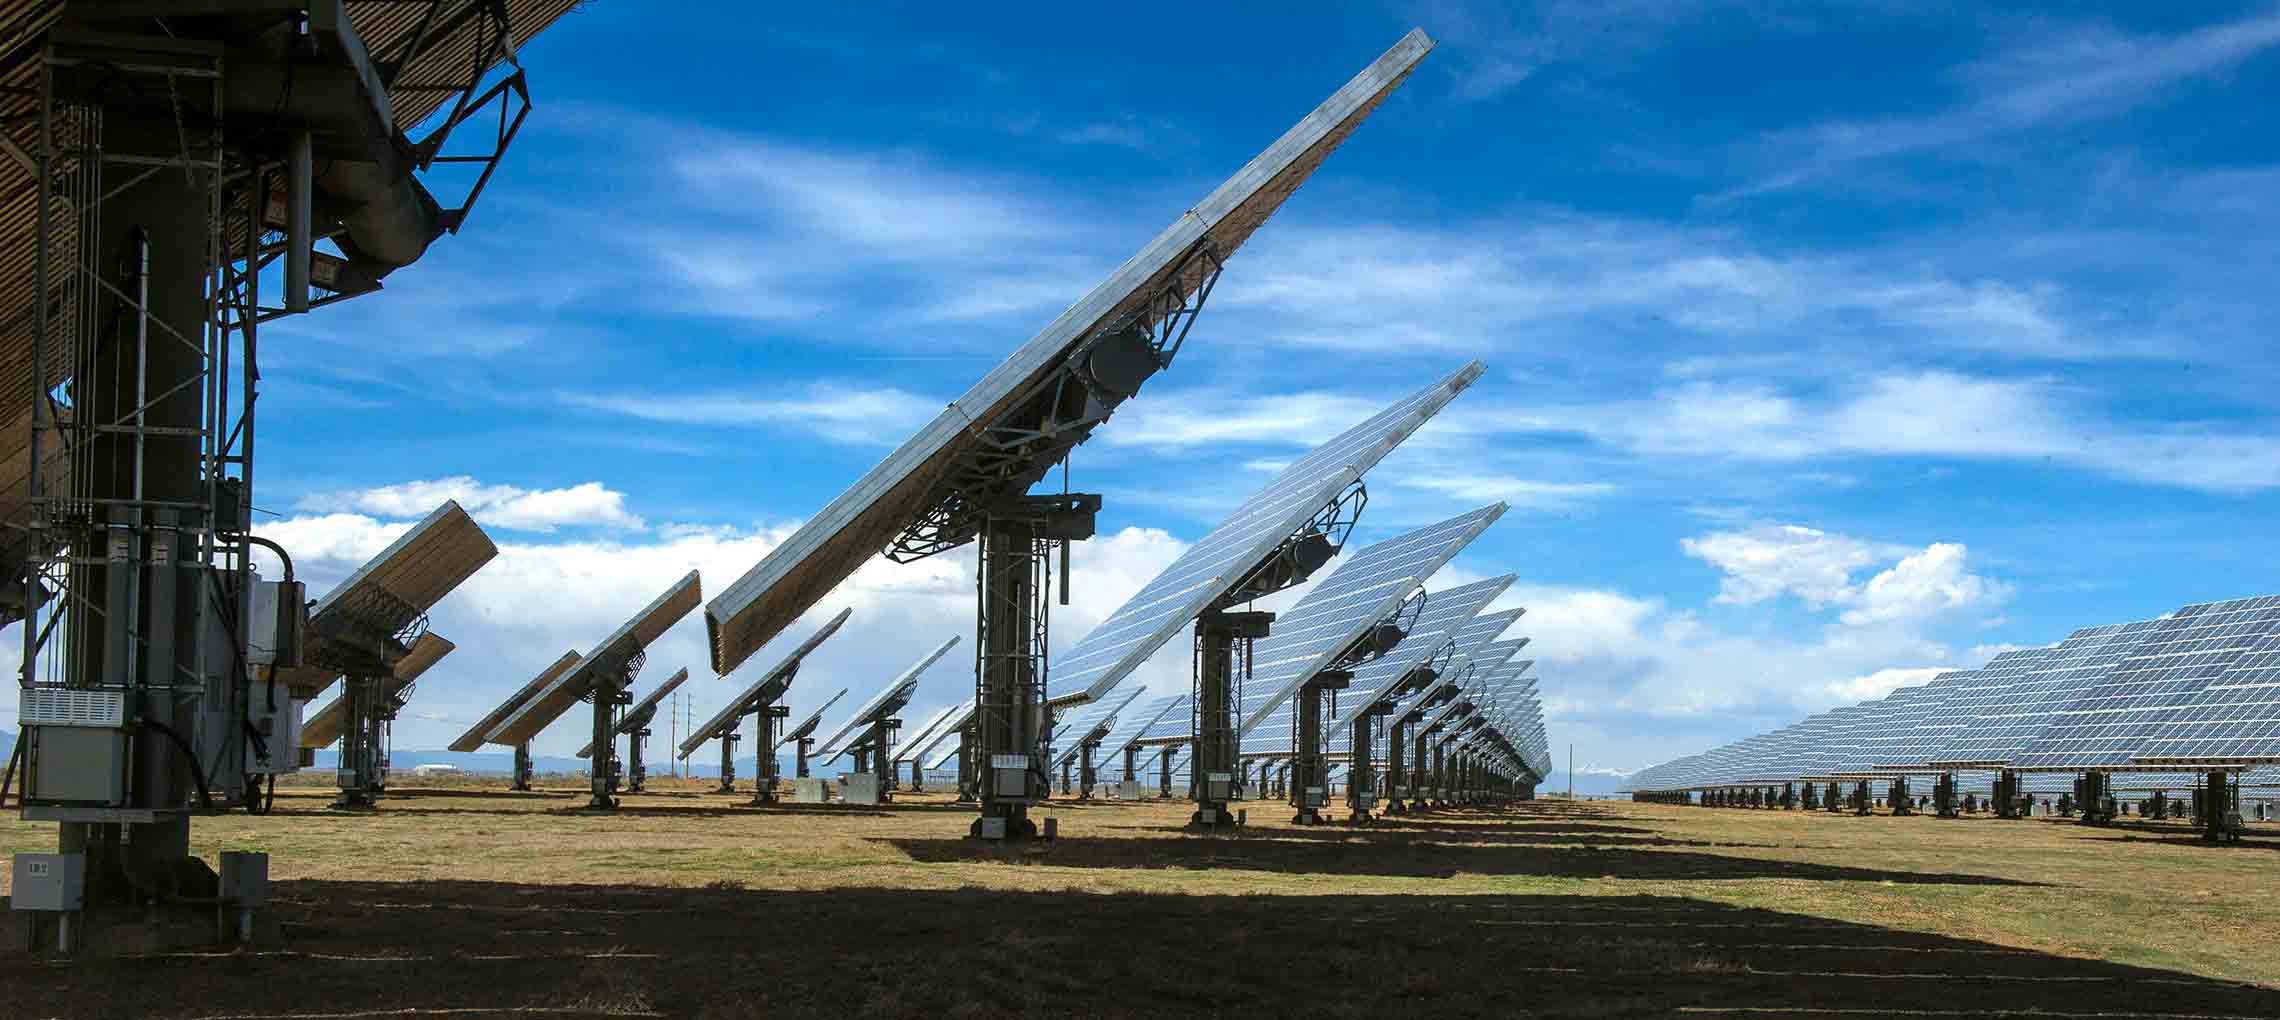 This photo shows numerous solar modules tilted toward the sun with a blue sky interspersed with white clouds in the background.